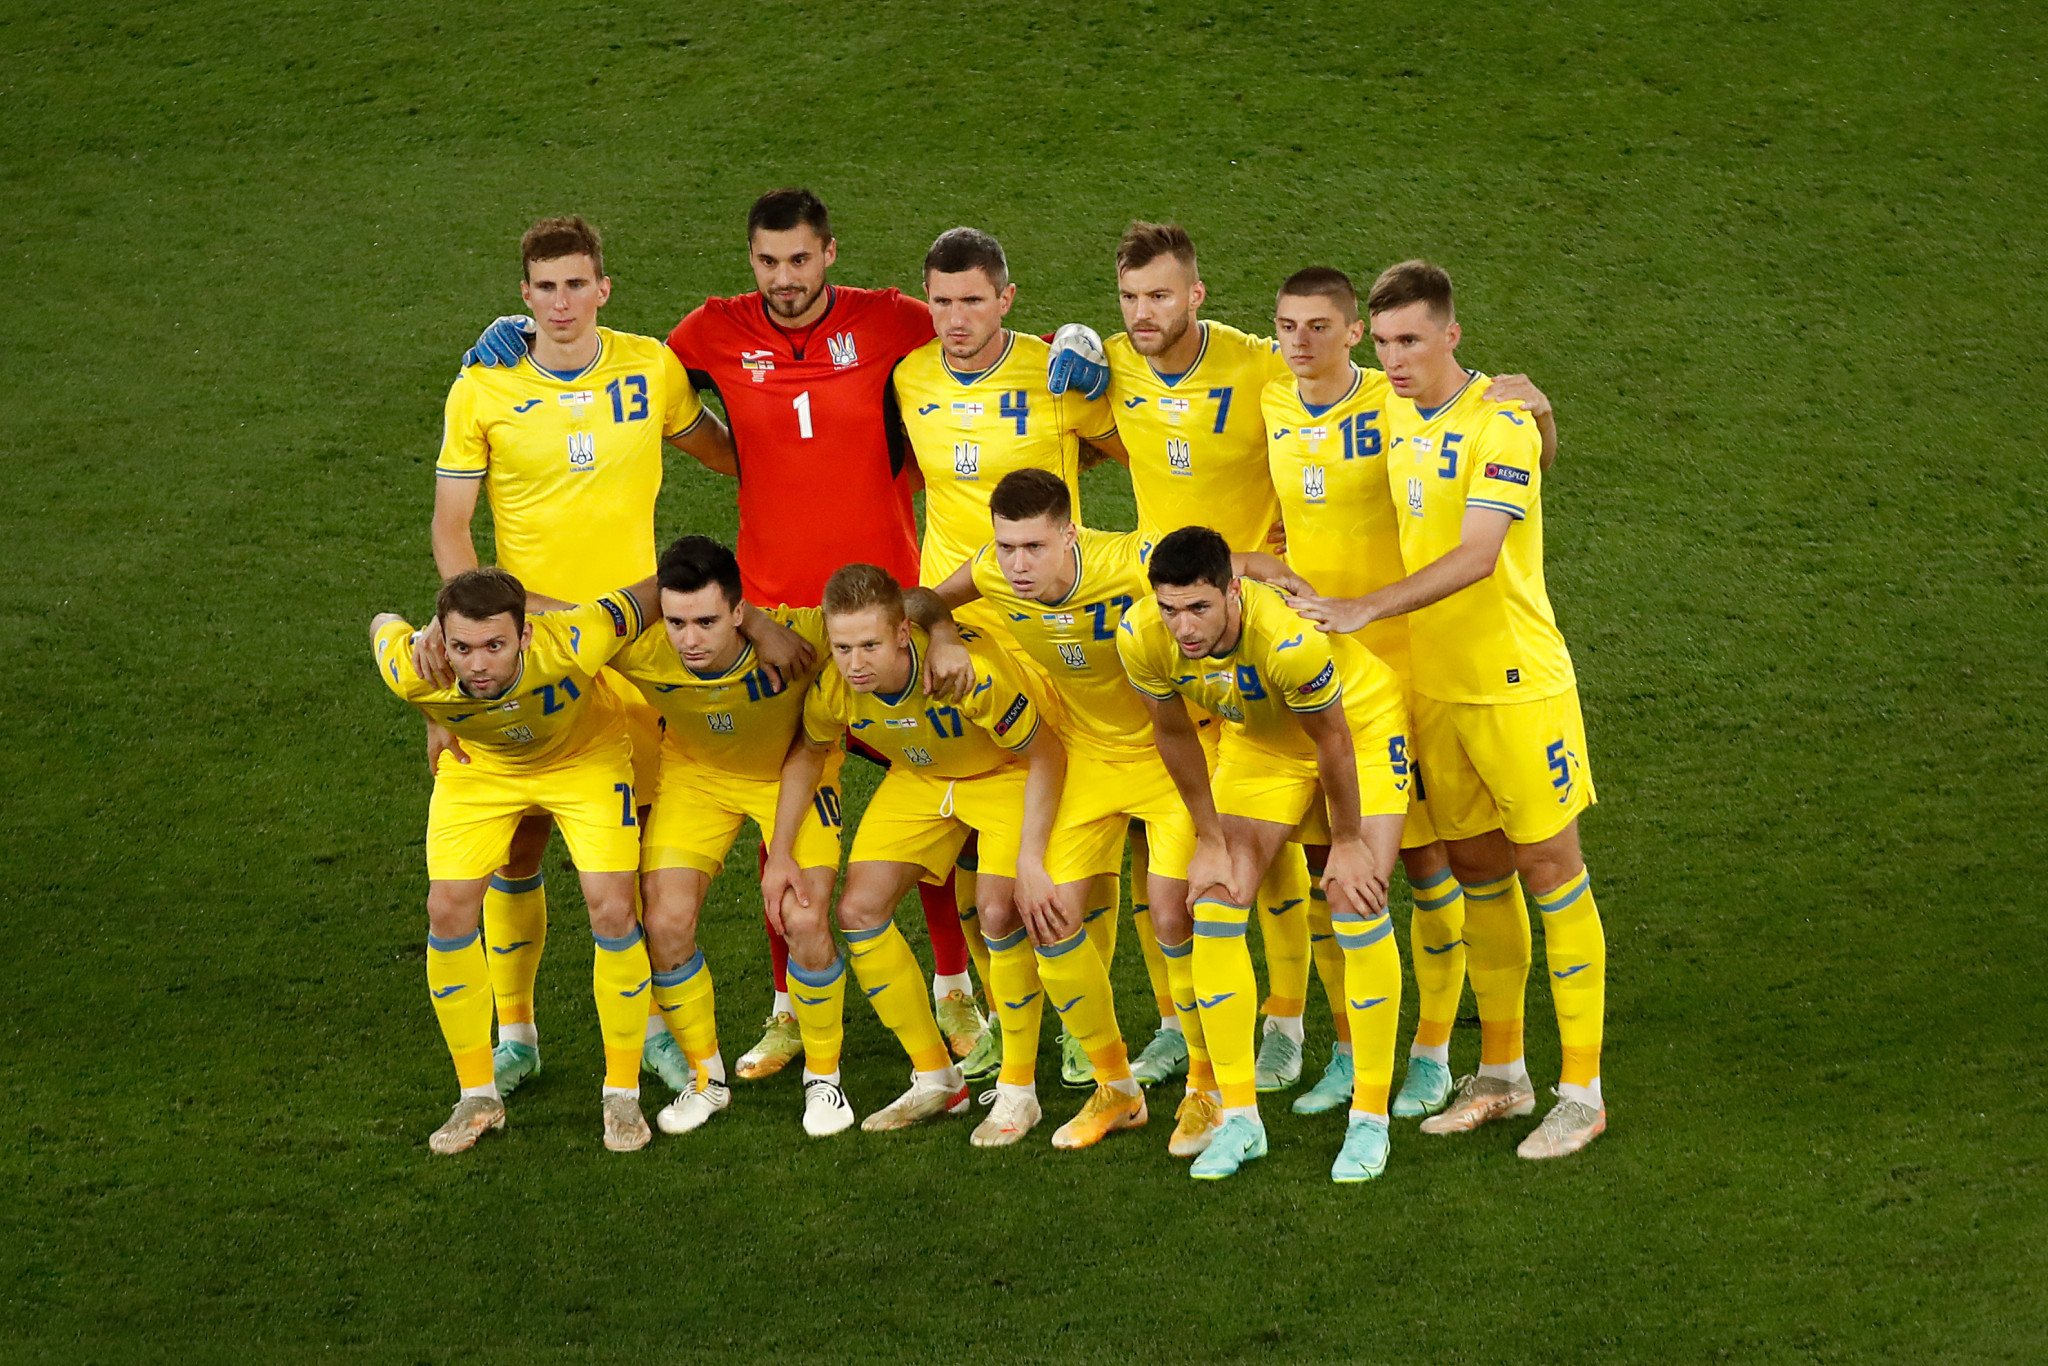 Euro 2020 quarter-finalists Ukraine are set to prepare for a crucial FIFA World Cup qualifier with a friendly against Borussia Mönchengladbach ©Getty Images